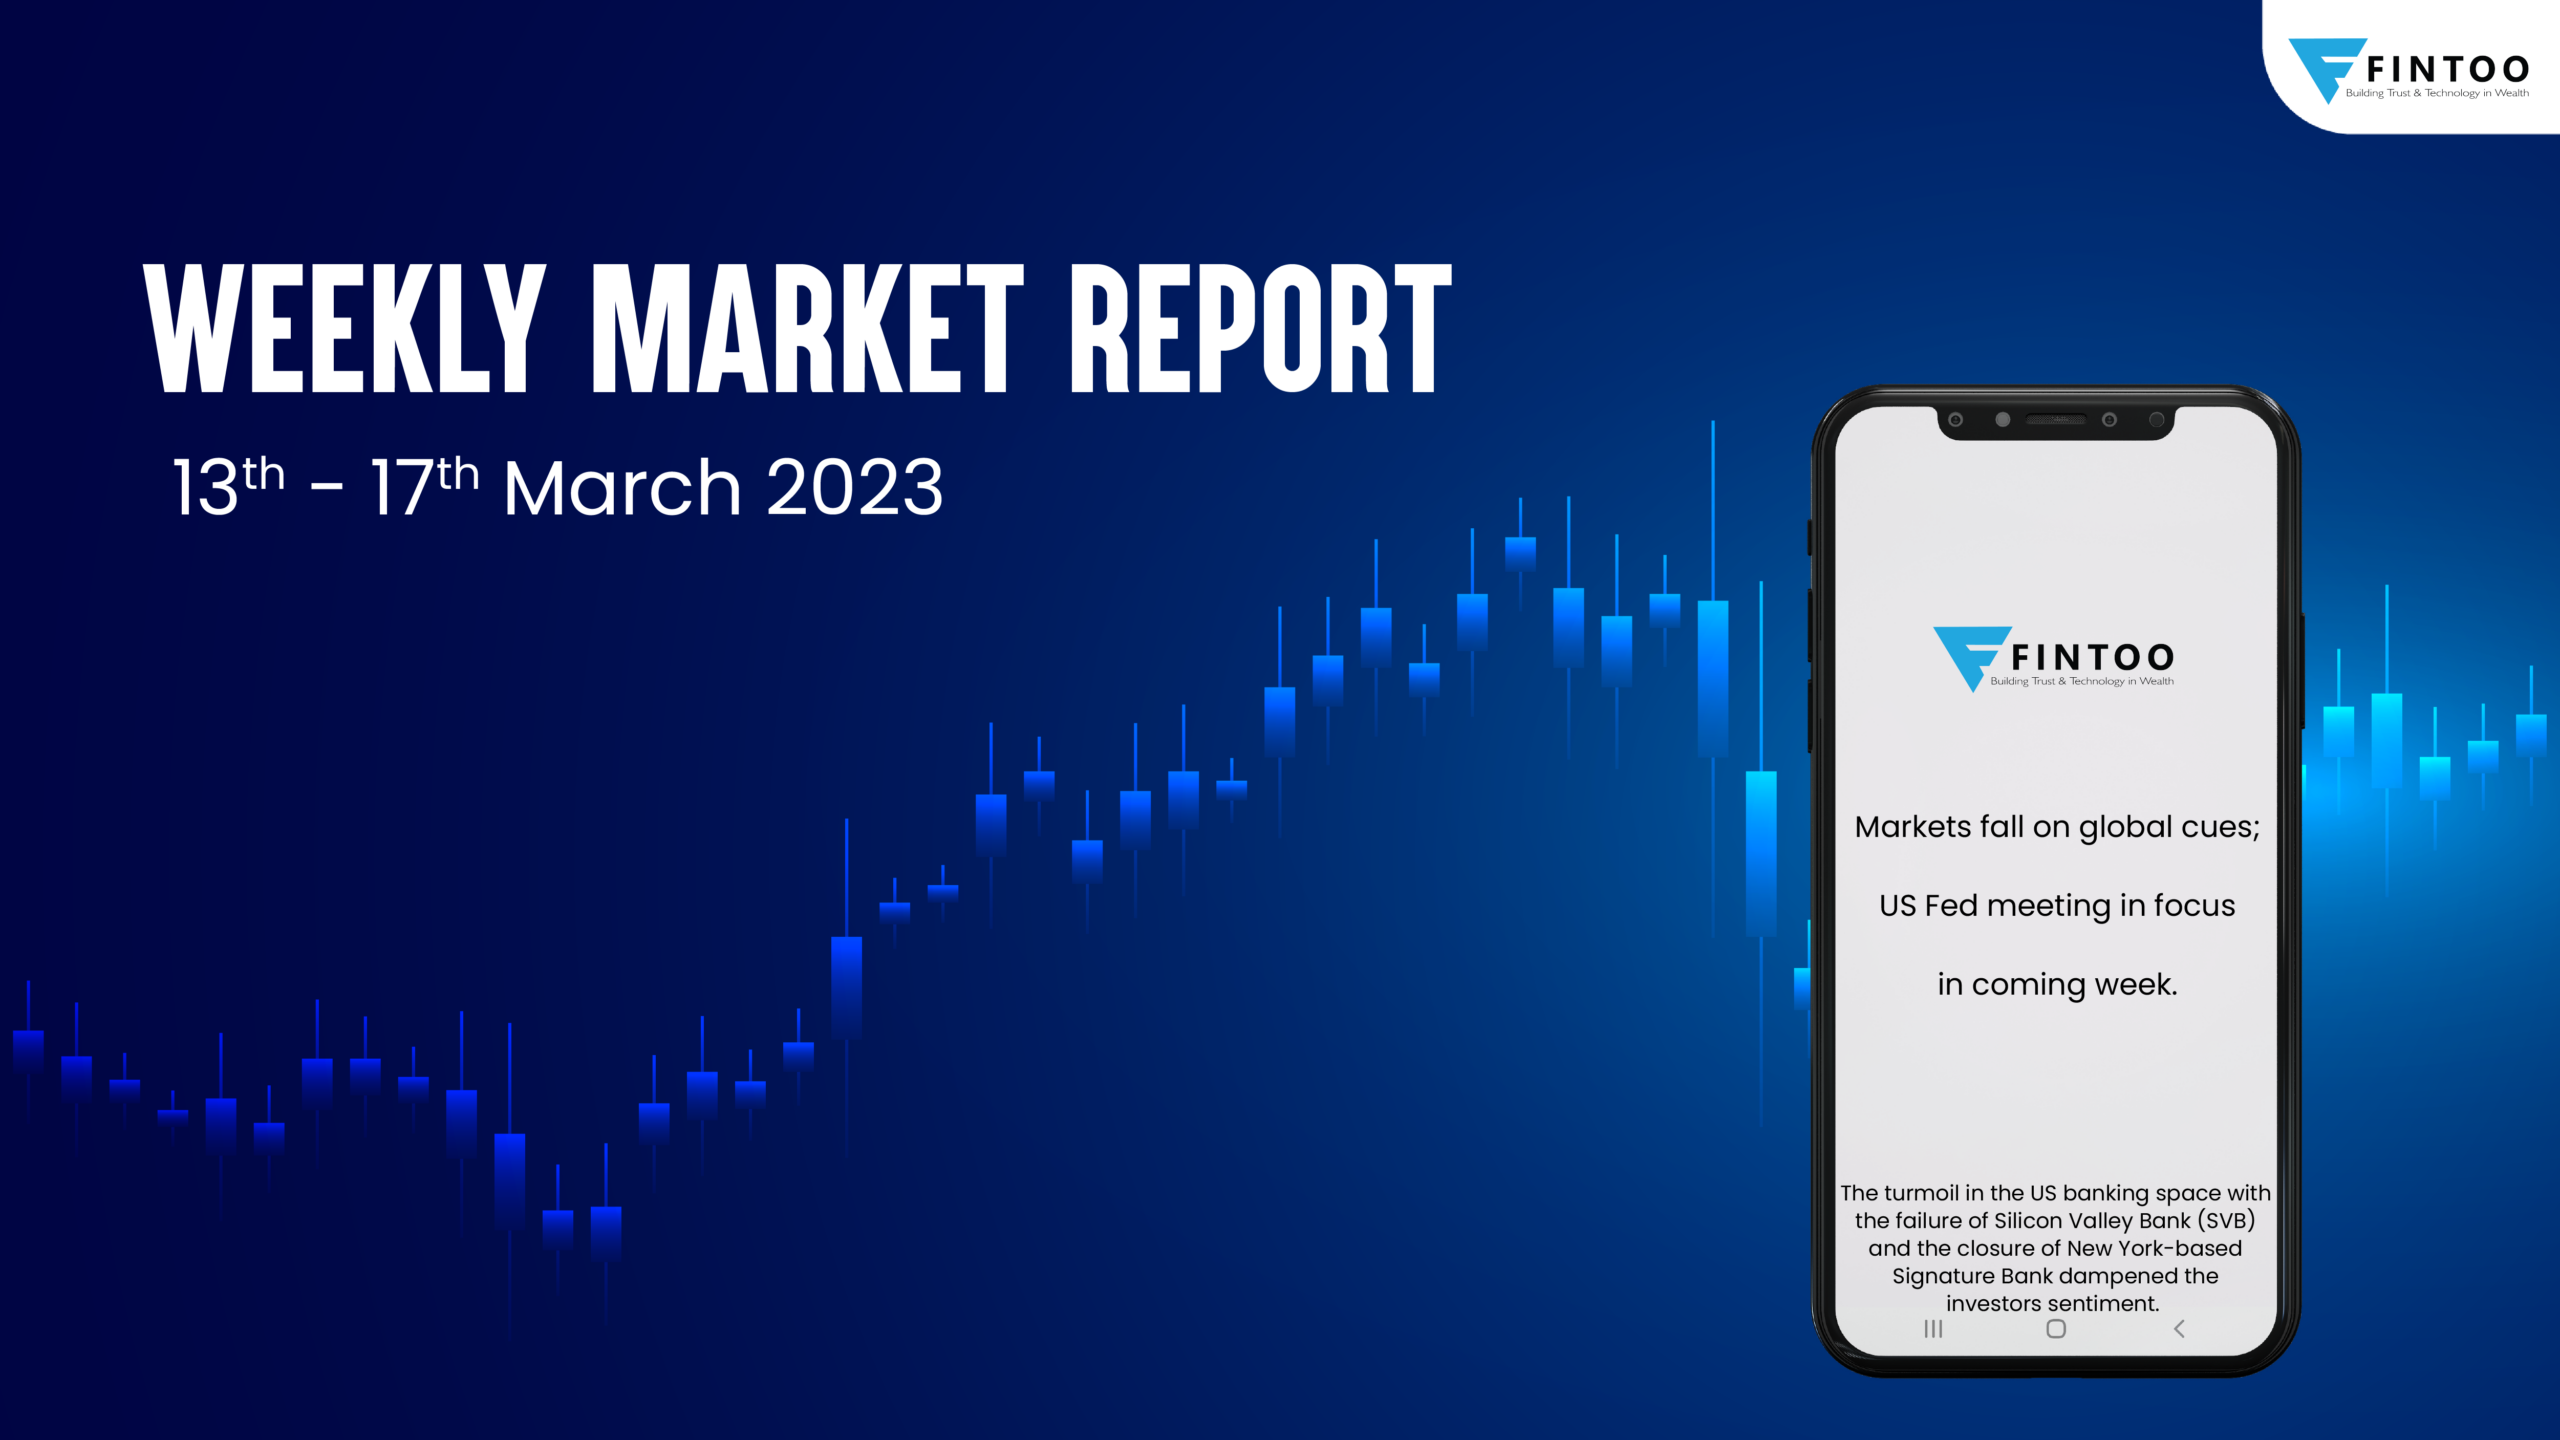 Weekly Market Report From 13th to 17th Mar 2023